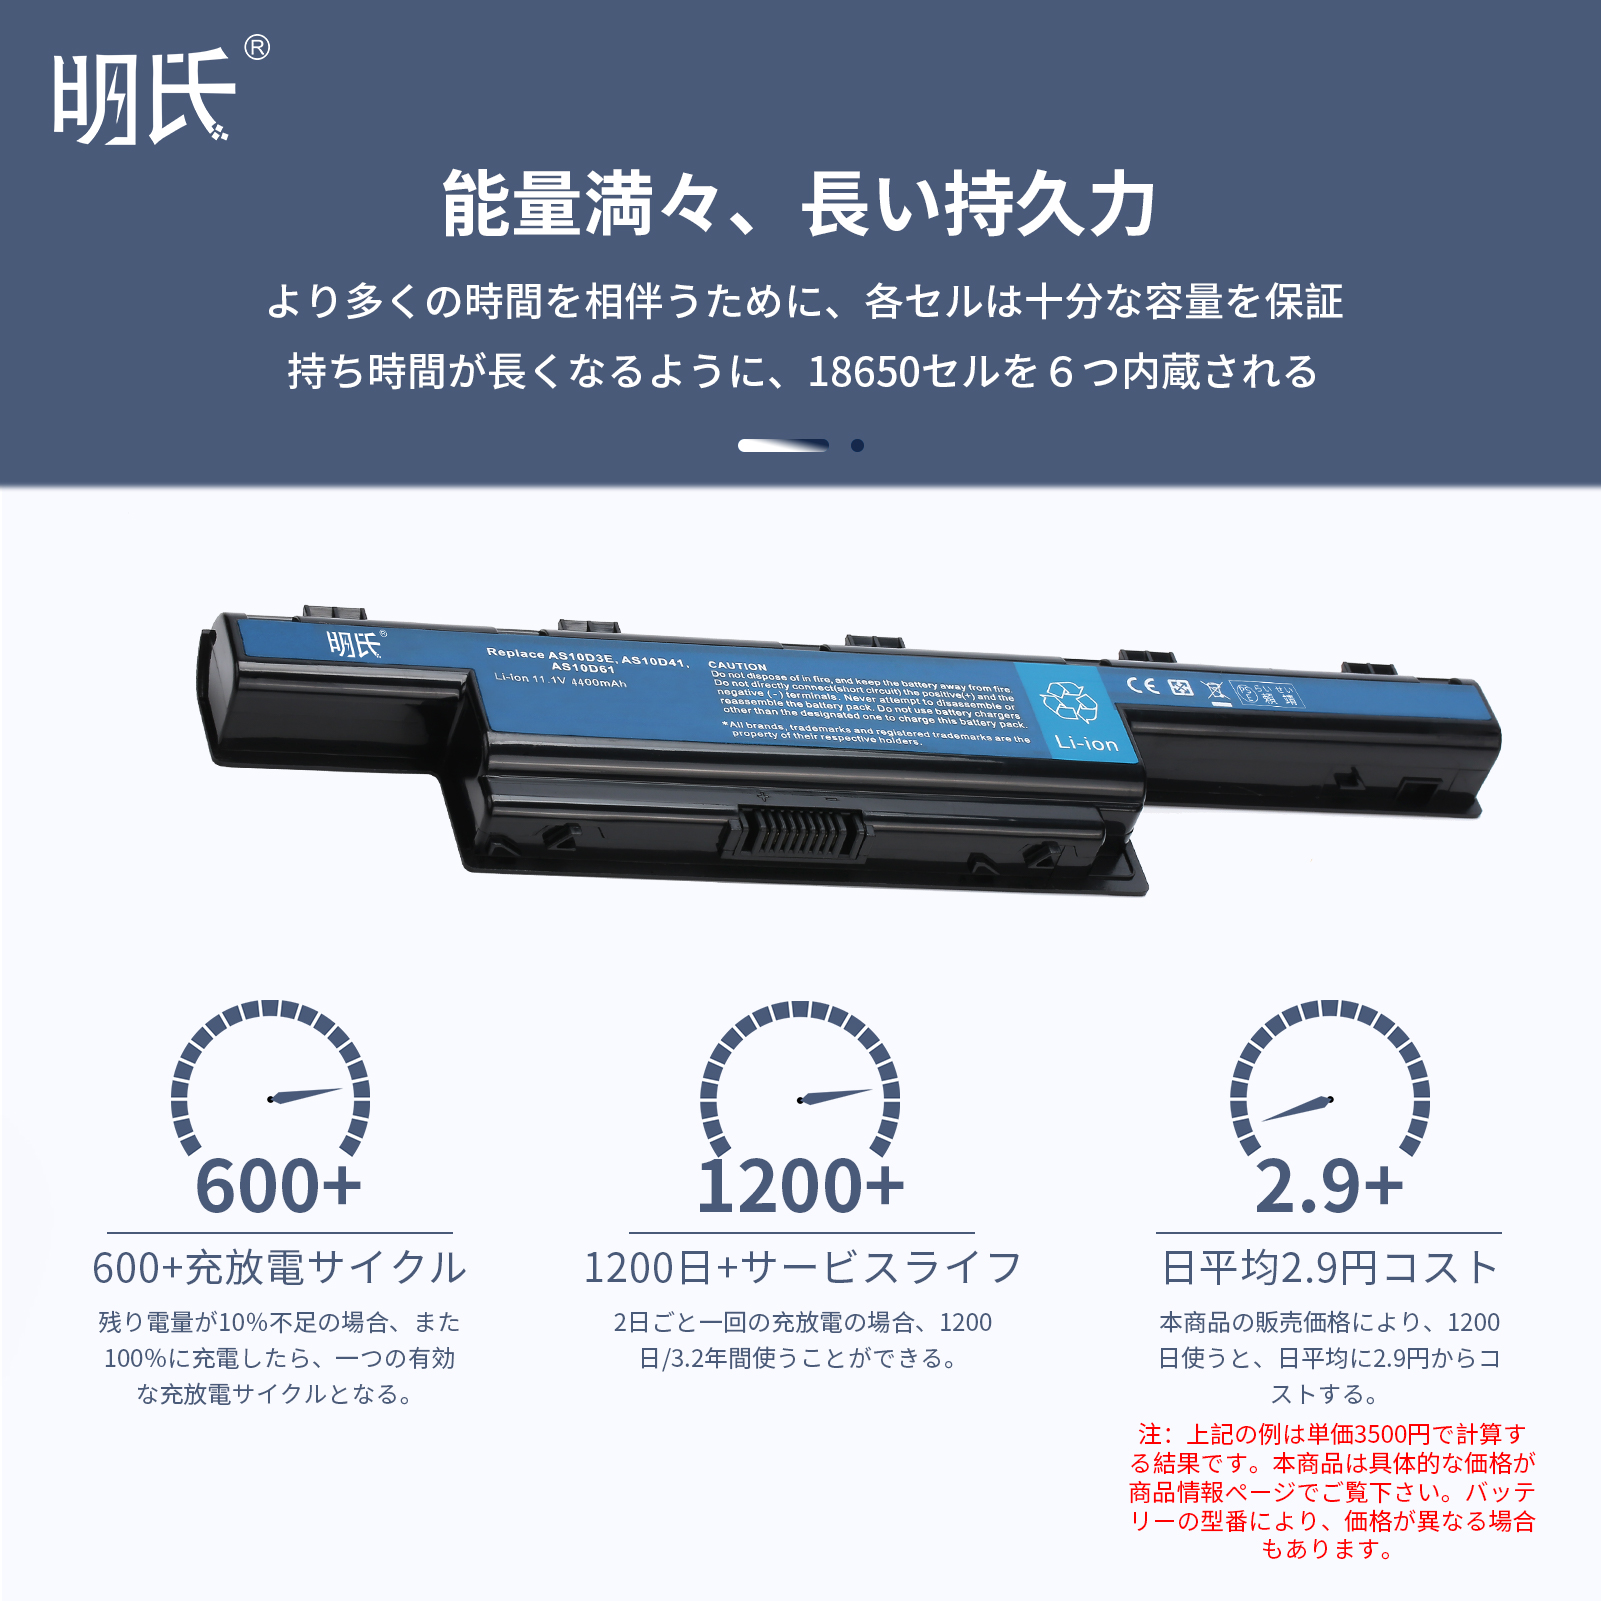 acer ASpire 5750対応 AS10D31 AS10D3E AS10D41 AS10D51 AS10D61 AS10D71用 高性能 ノートパソコン 互換 バッテリー